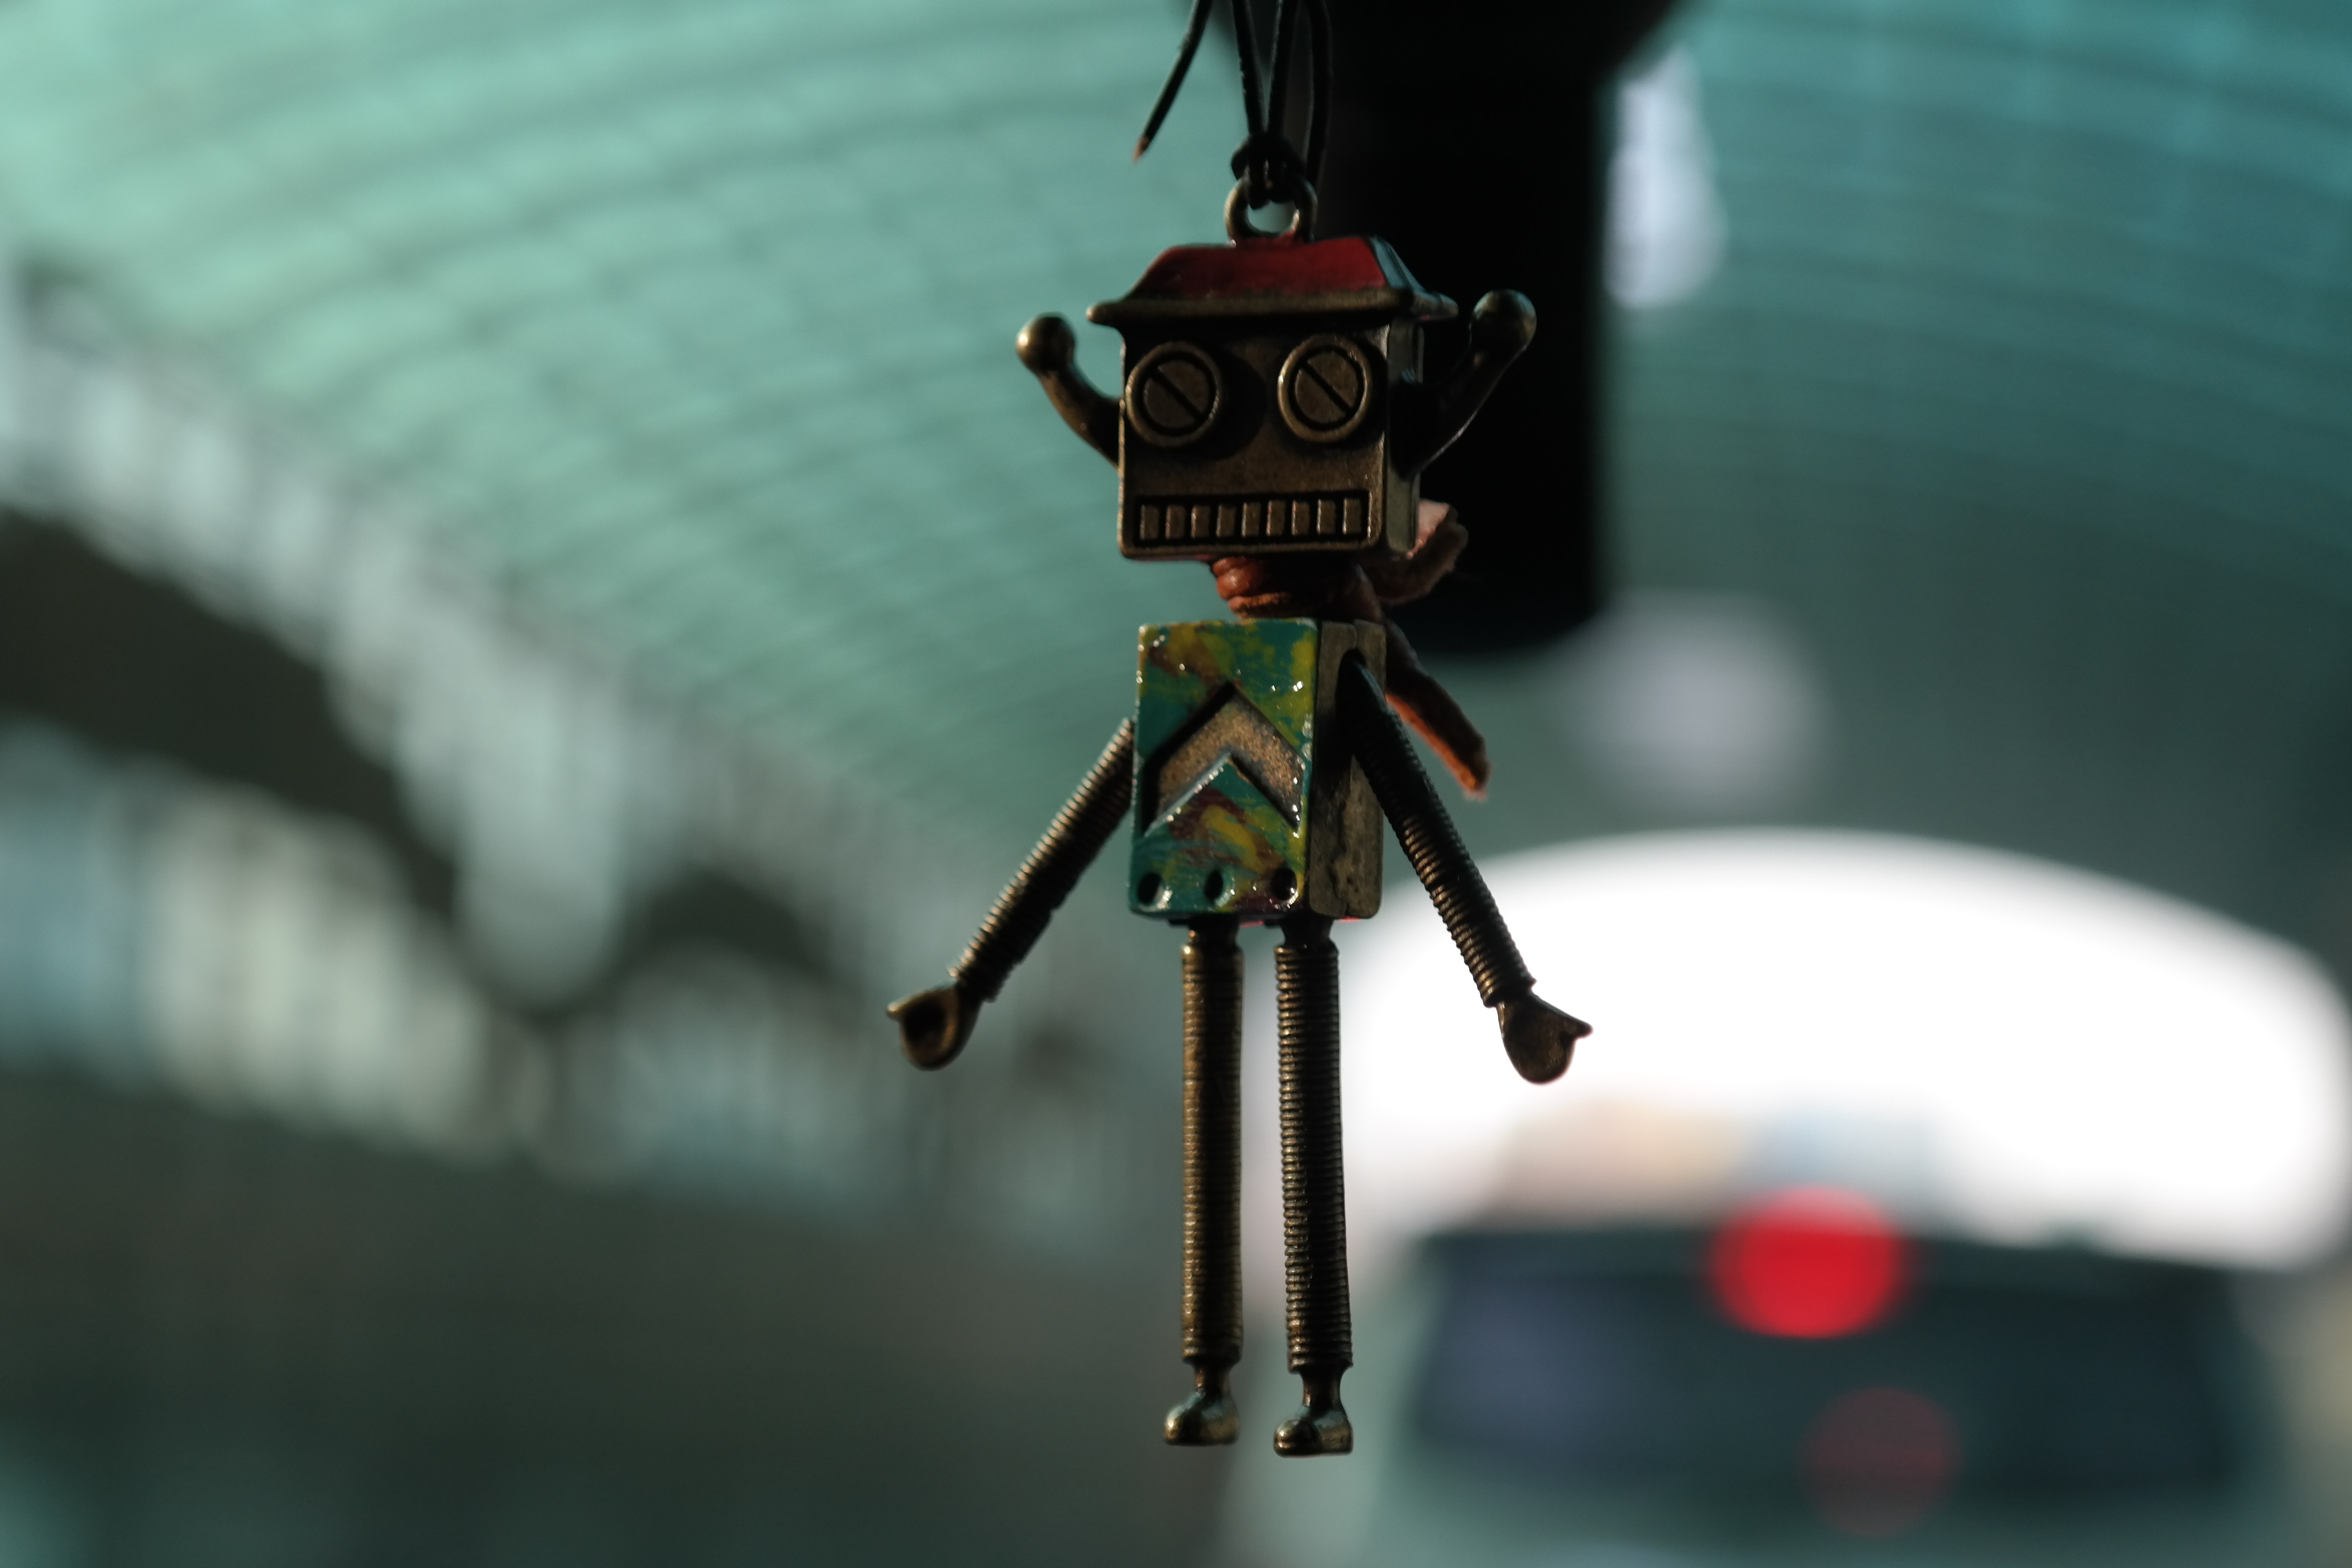 brown and green robot keychain